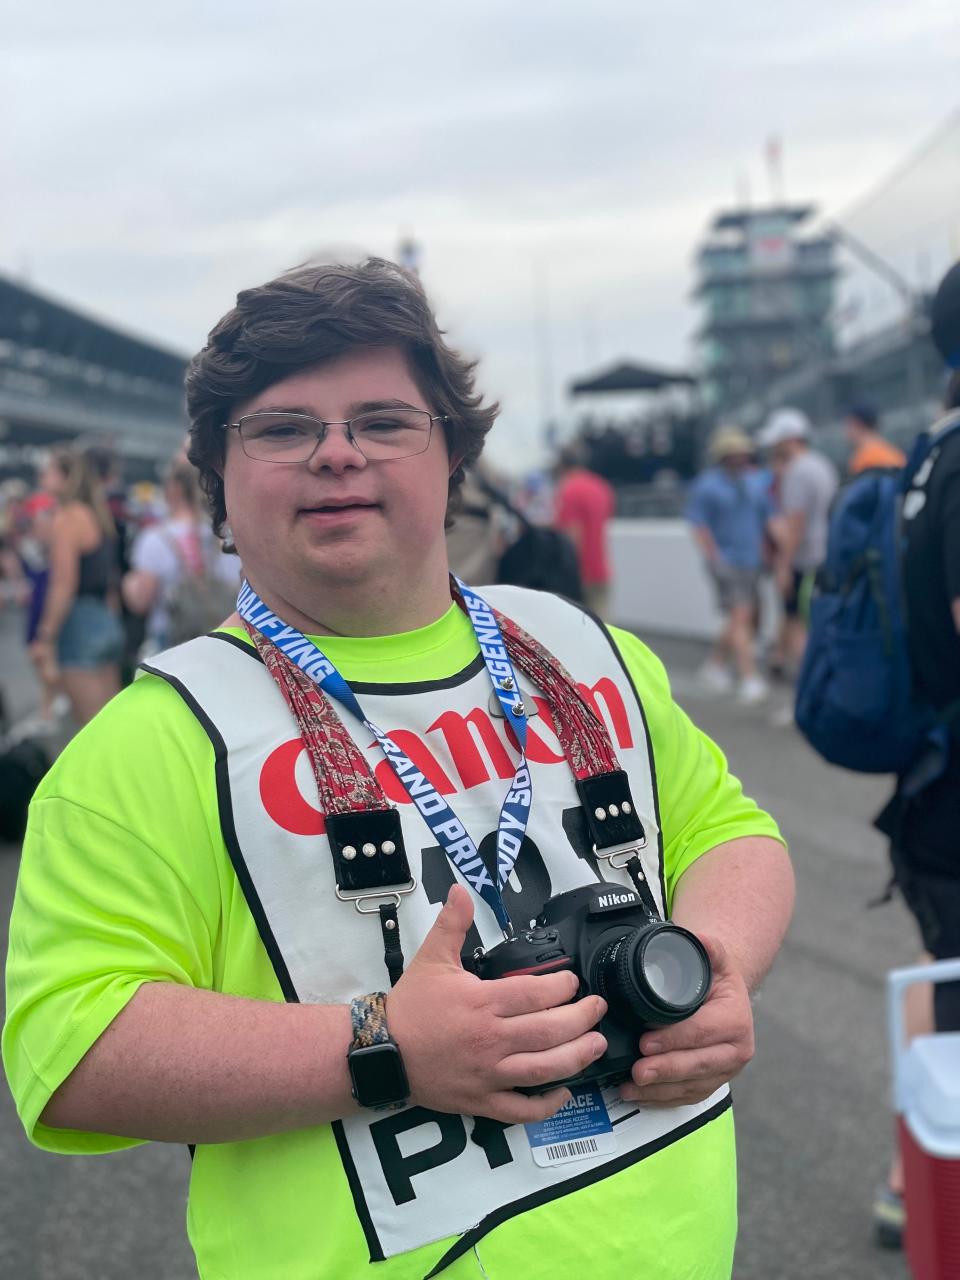 One of Houston Vandergriff's opportunities was to shoot photos in the pits of the Indianapolis 500.